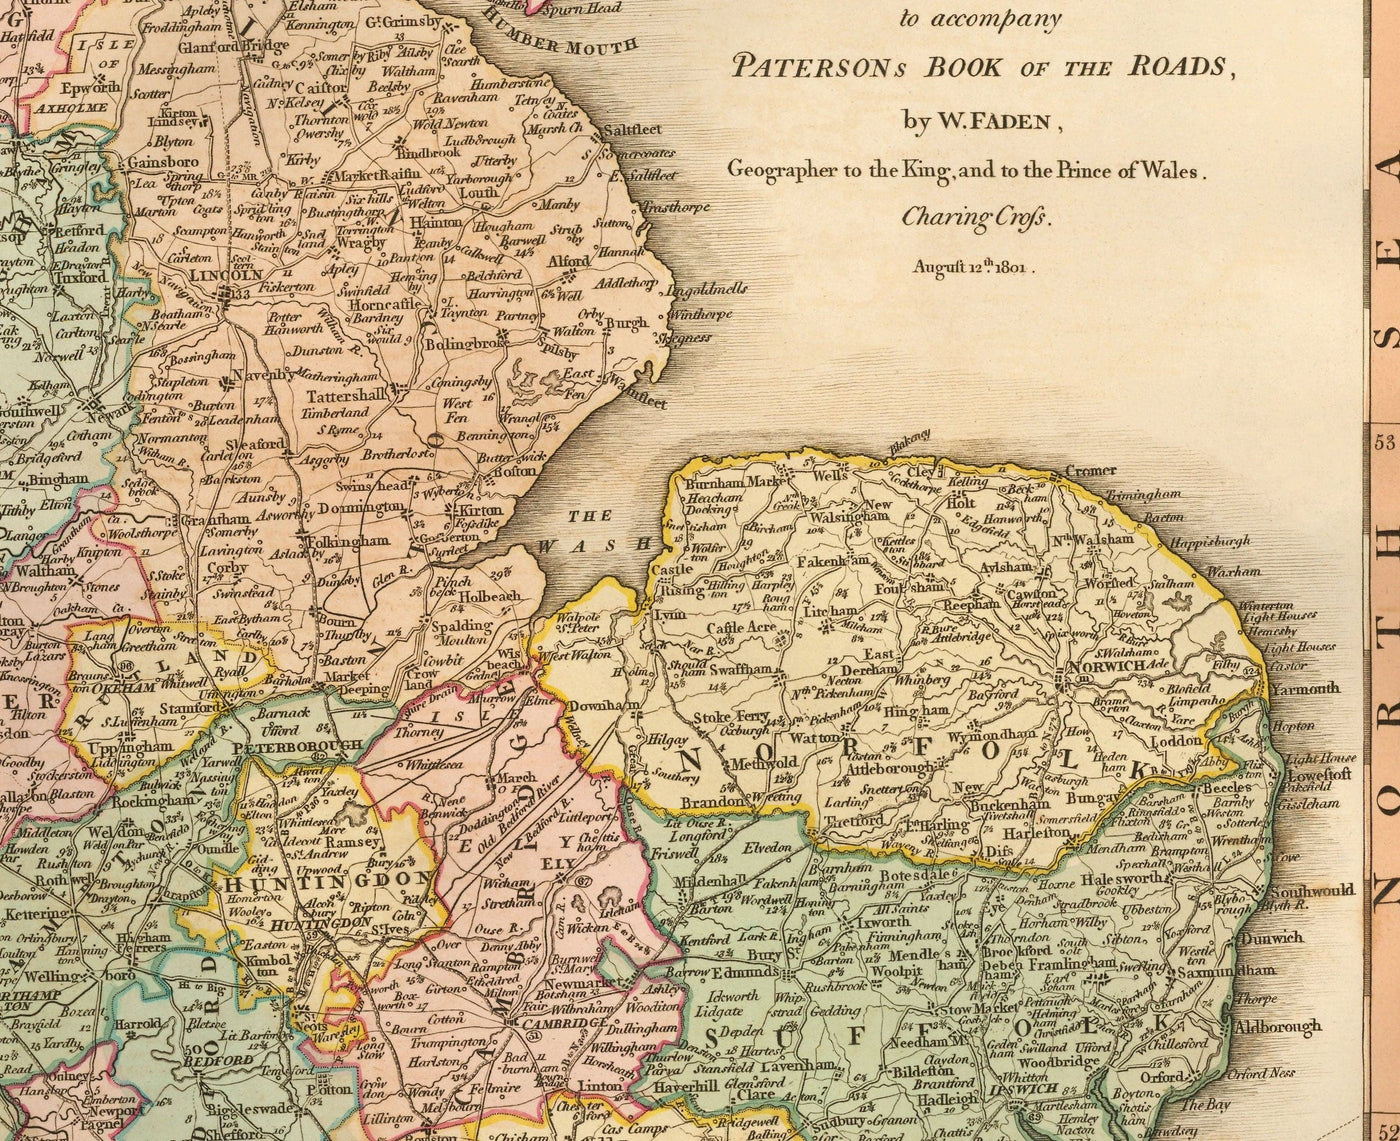 Old Map of Great Britain, 1801 by Faden - England, Wales, Scotland, Roads, Canals, Mail Coach